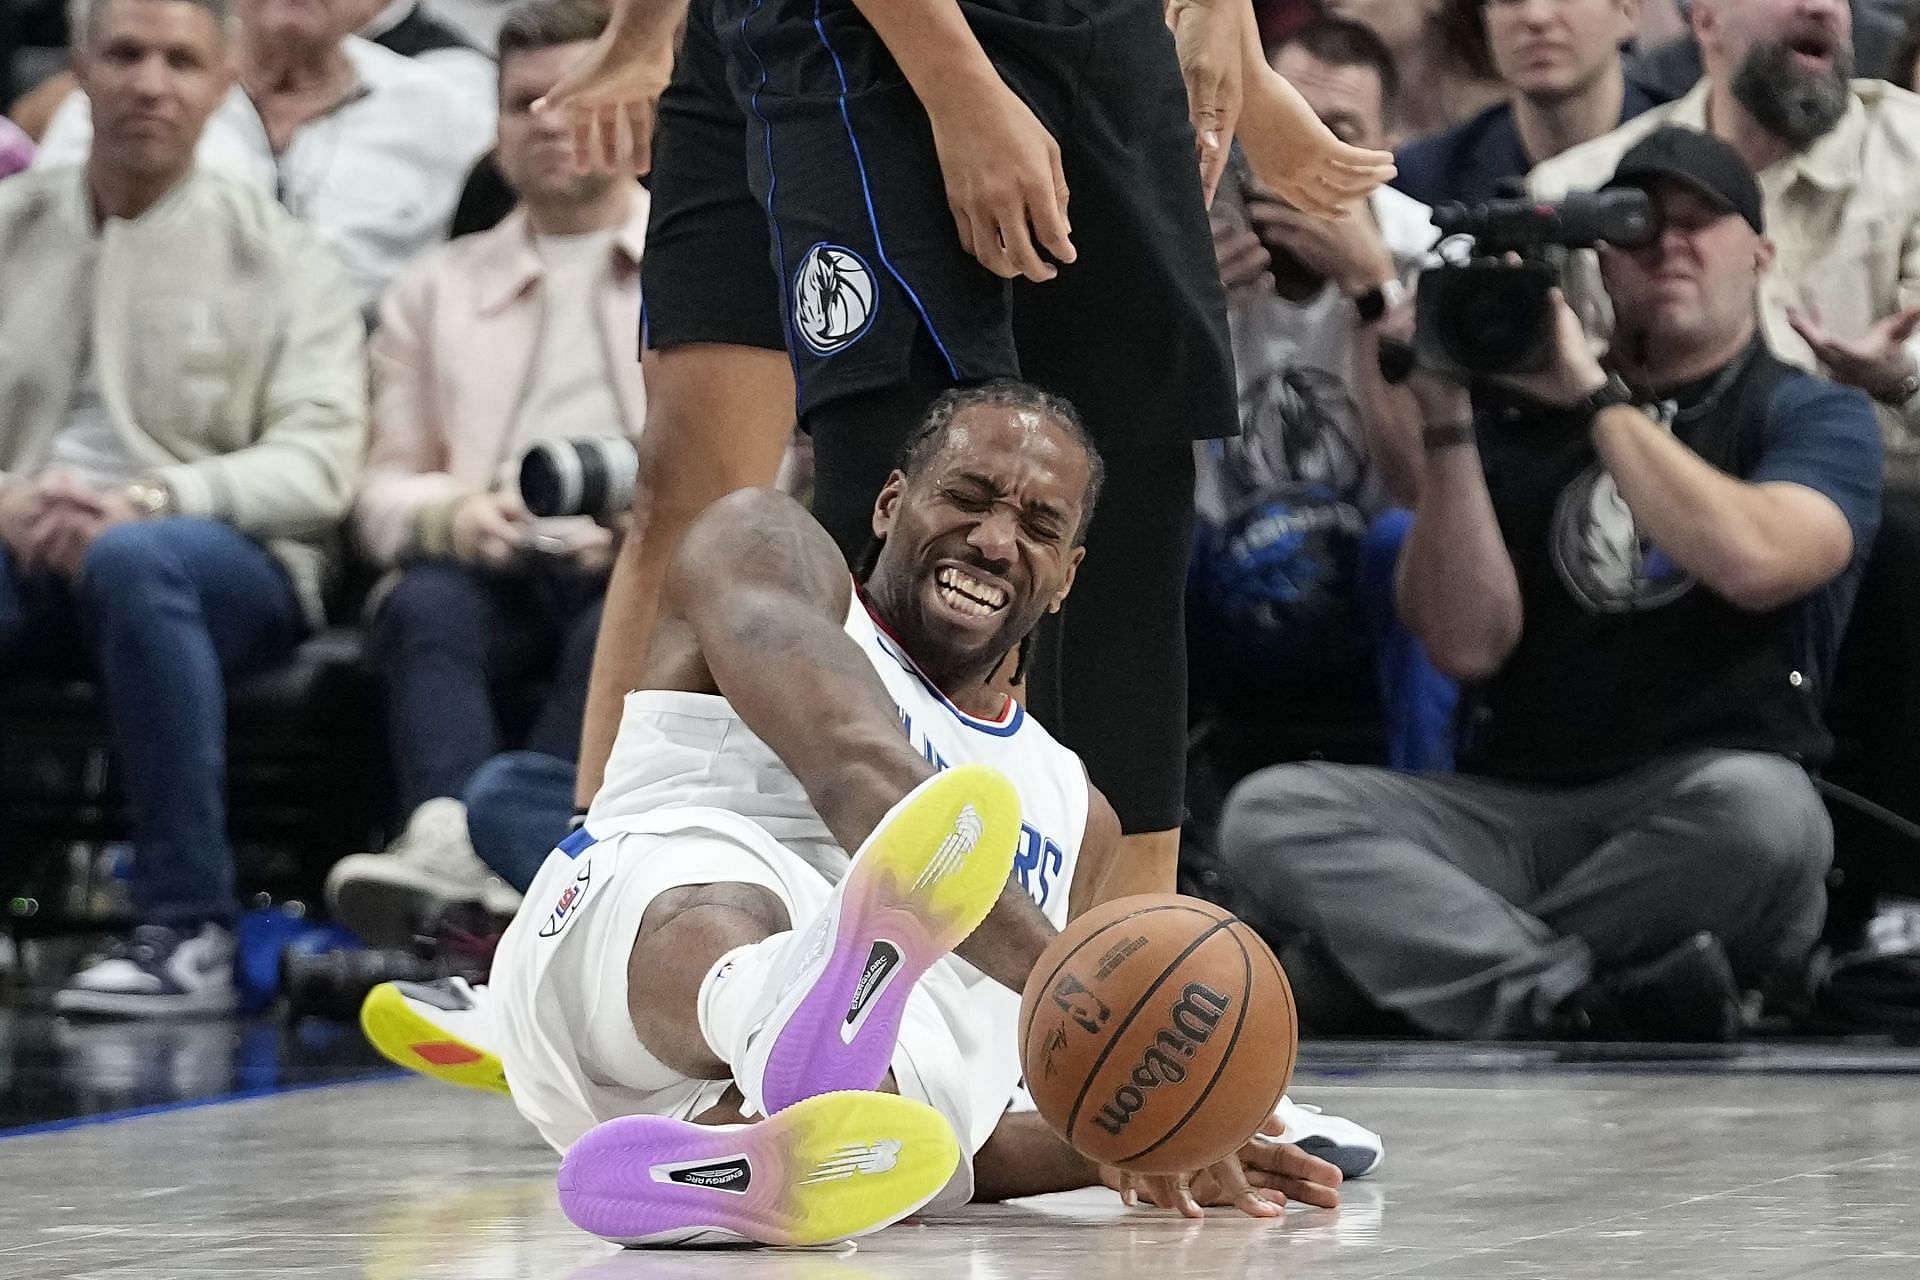 Why is Kawhi Leonard not playing tonight against Hornets? Latest injury update for Clippers star (Dec. 26)